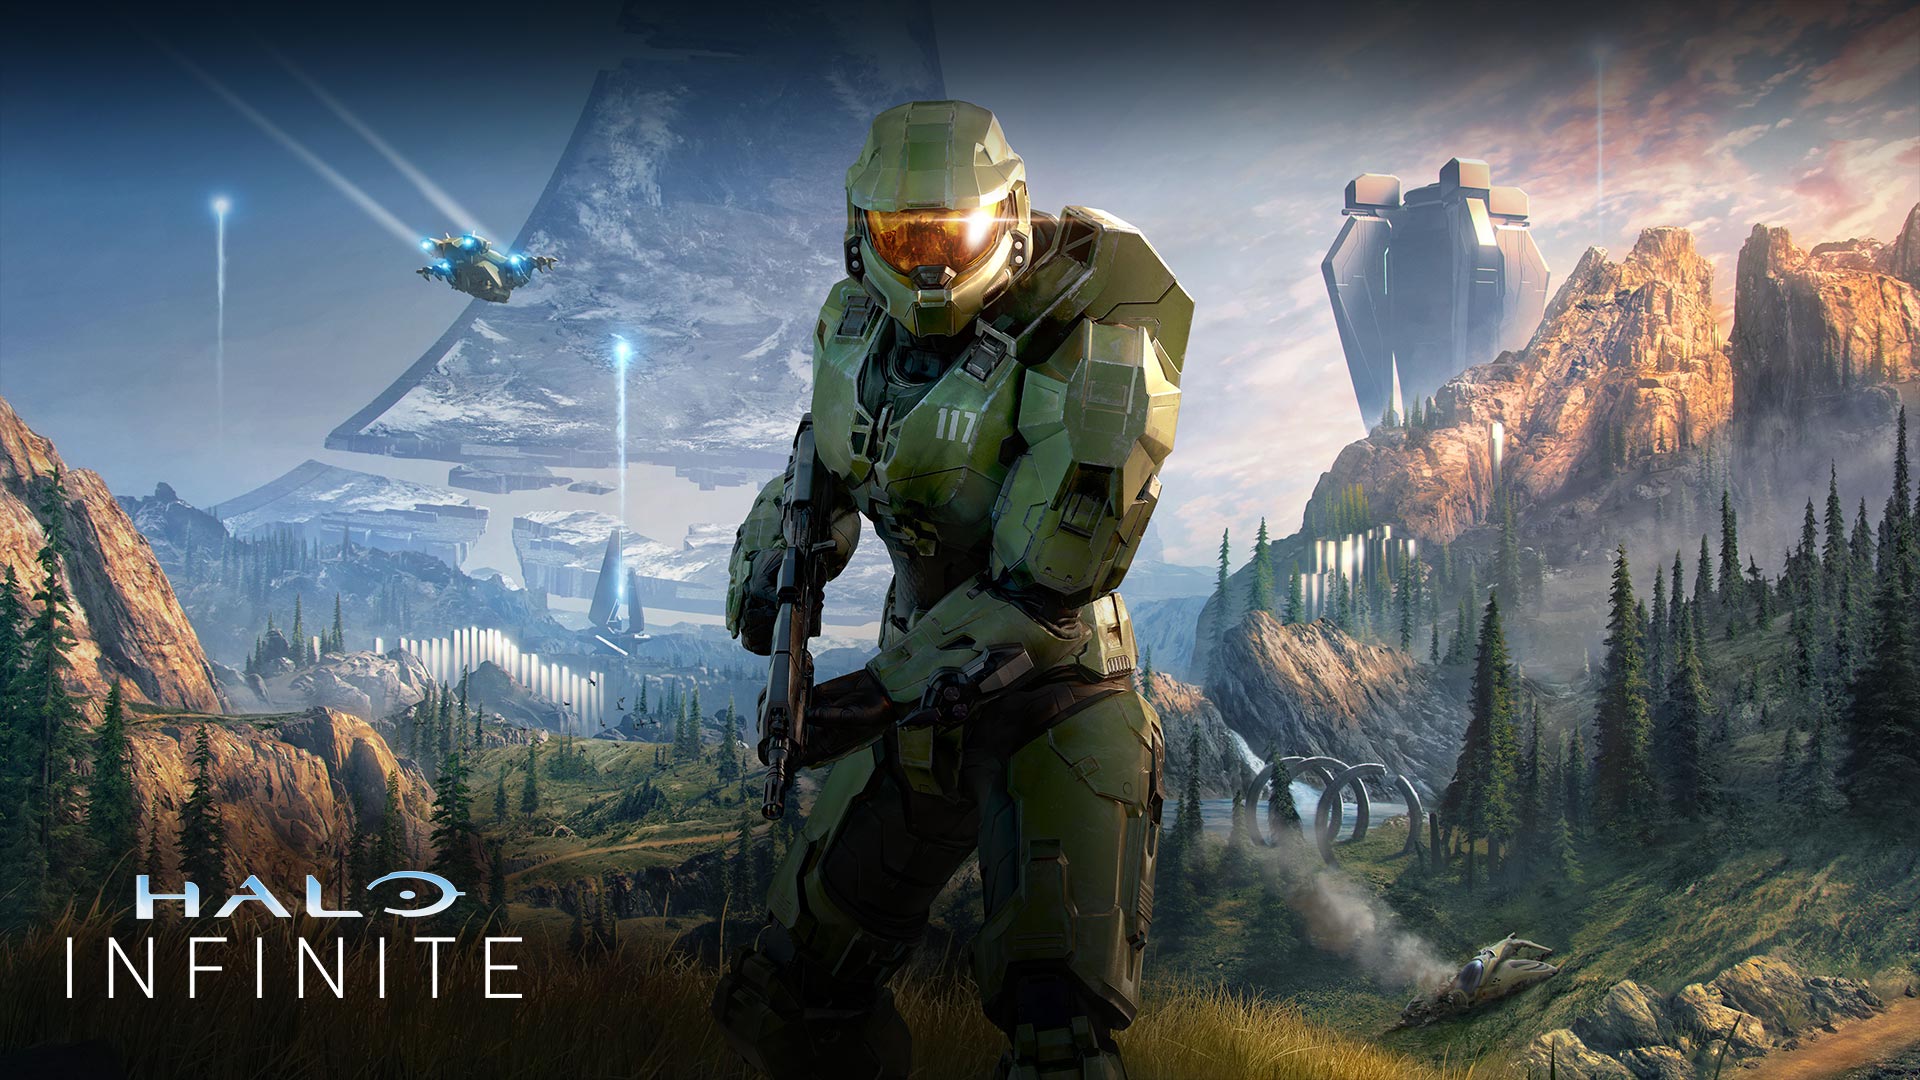 Master Chief faces forward in a lush valley with a broken Halo ring behind him